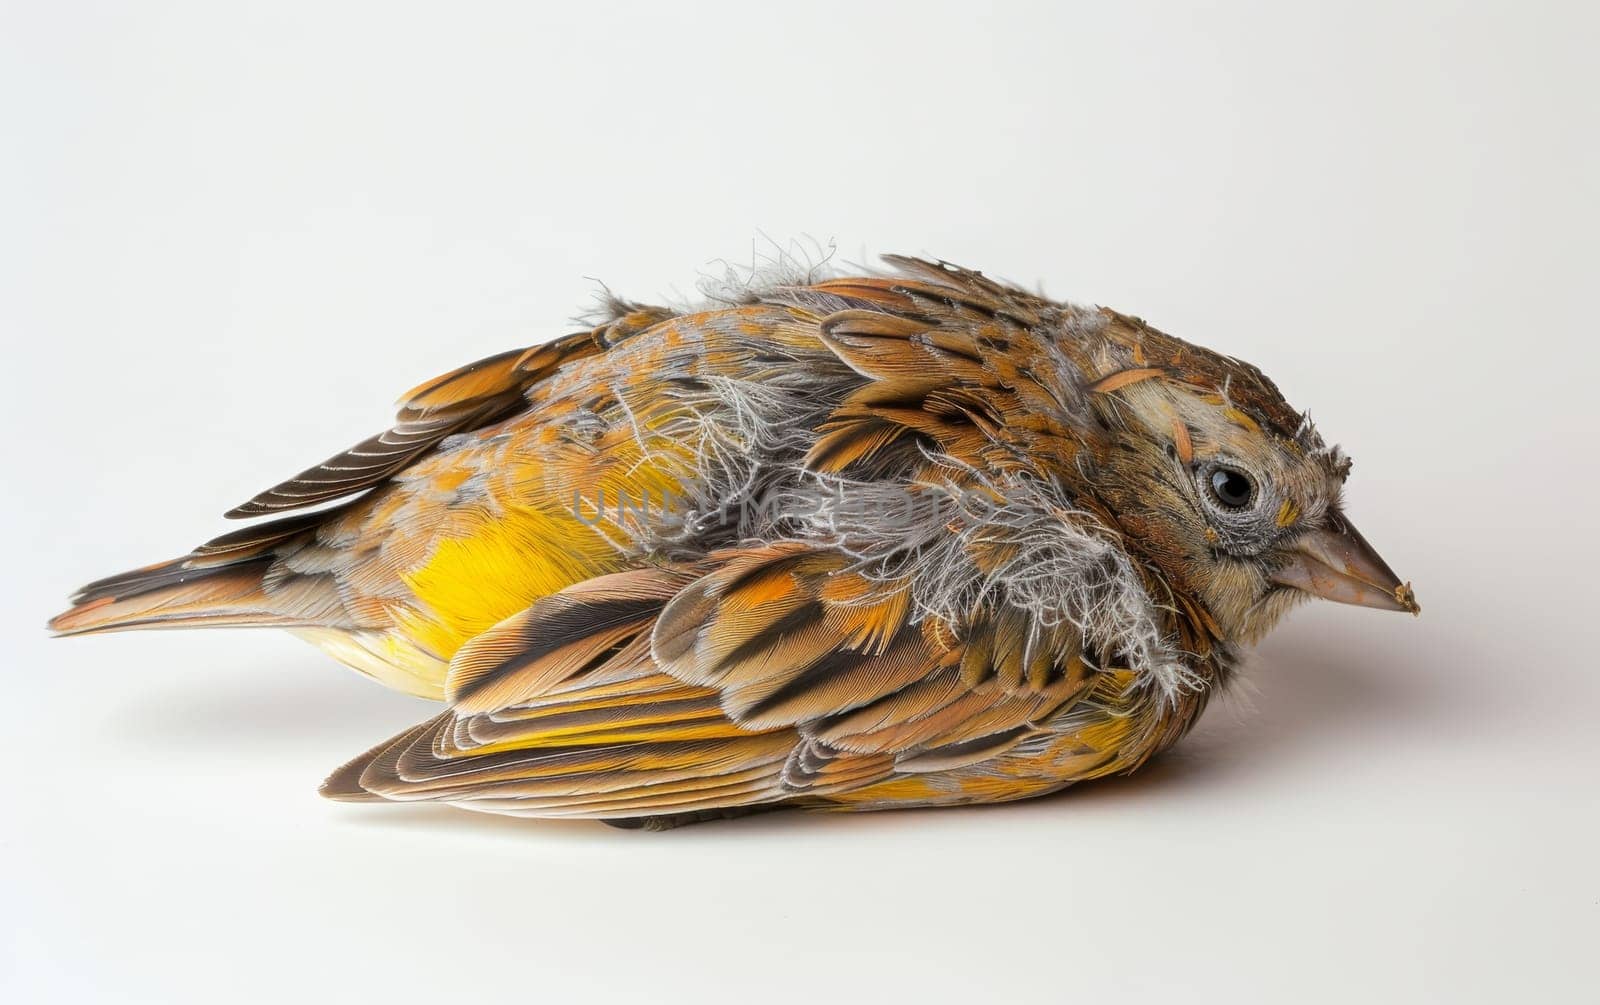 An injured sparrow lying on a white surface, showcasing its delicate condition and vulnerability